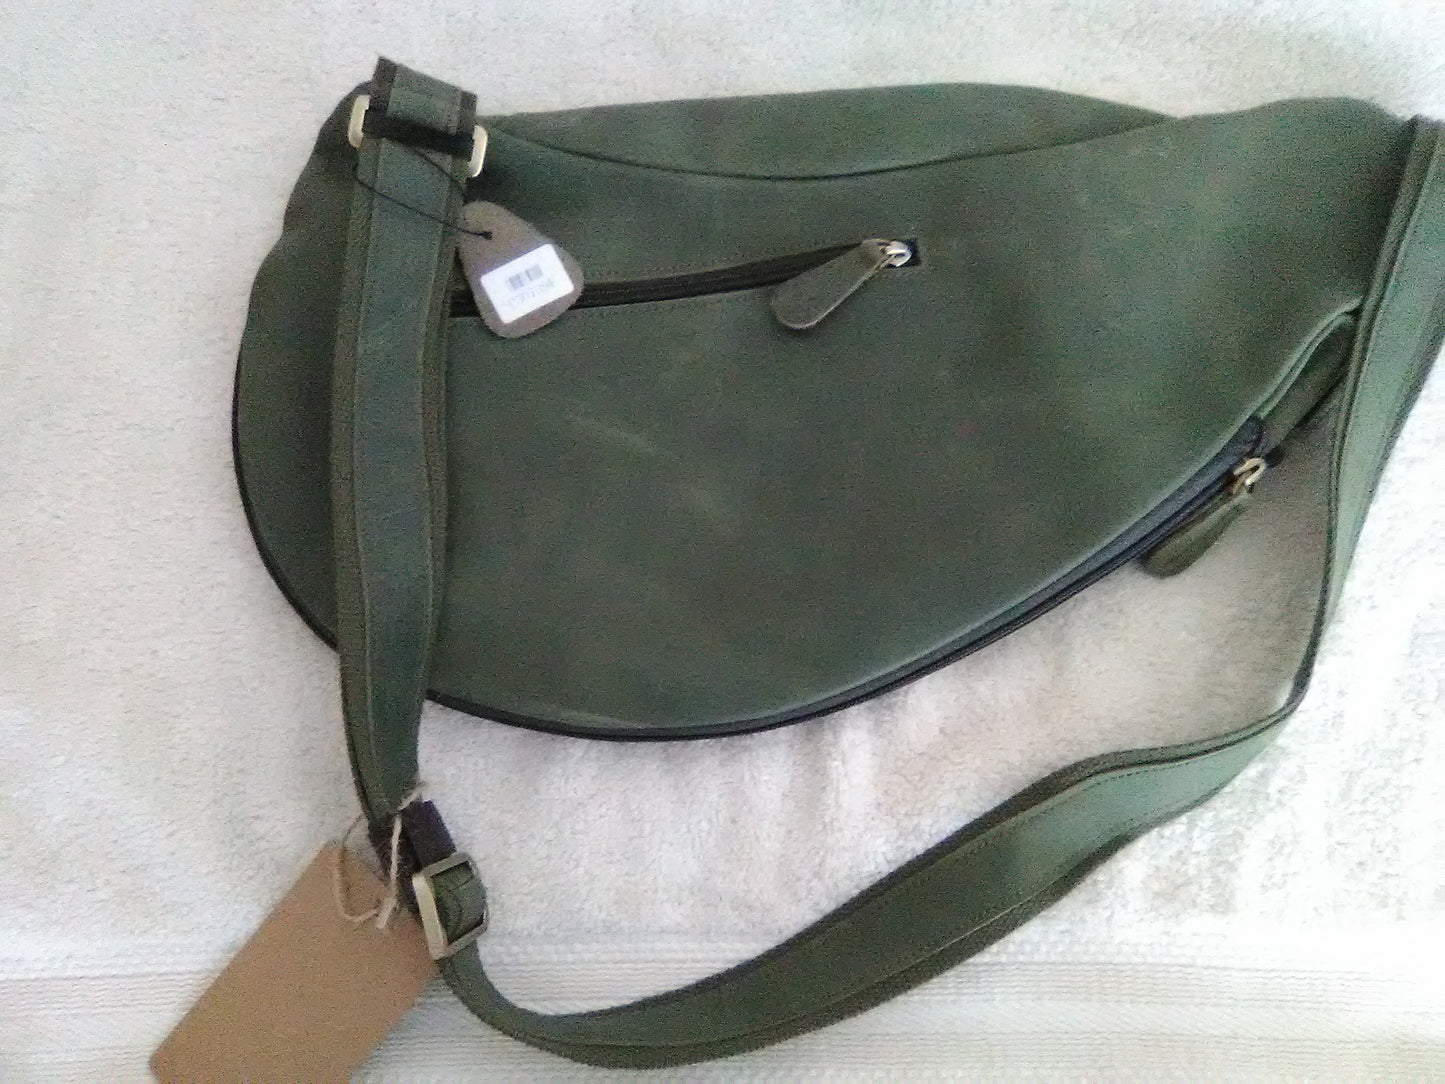 Polare Real Leather Cross Body Sling Bag Army Green